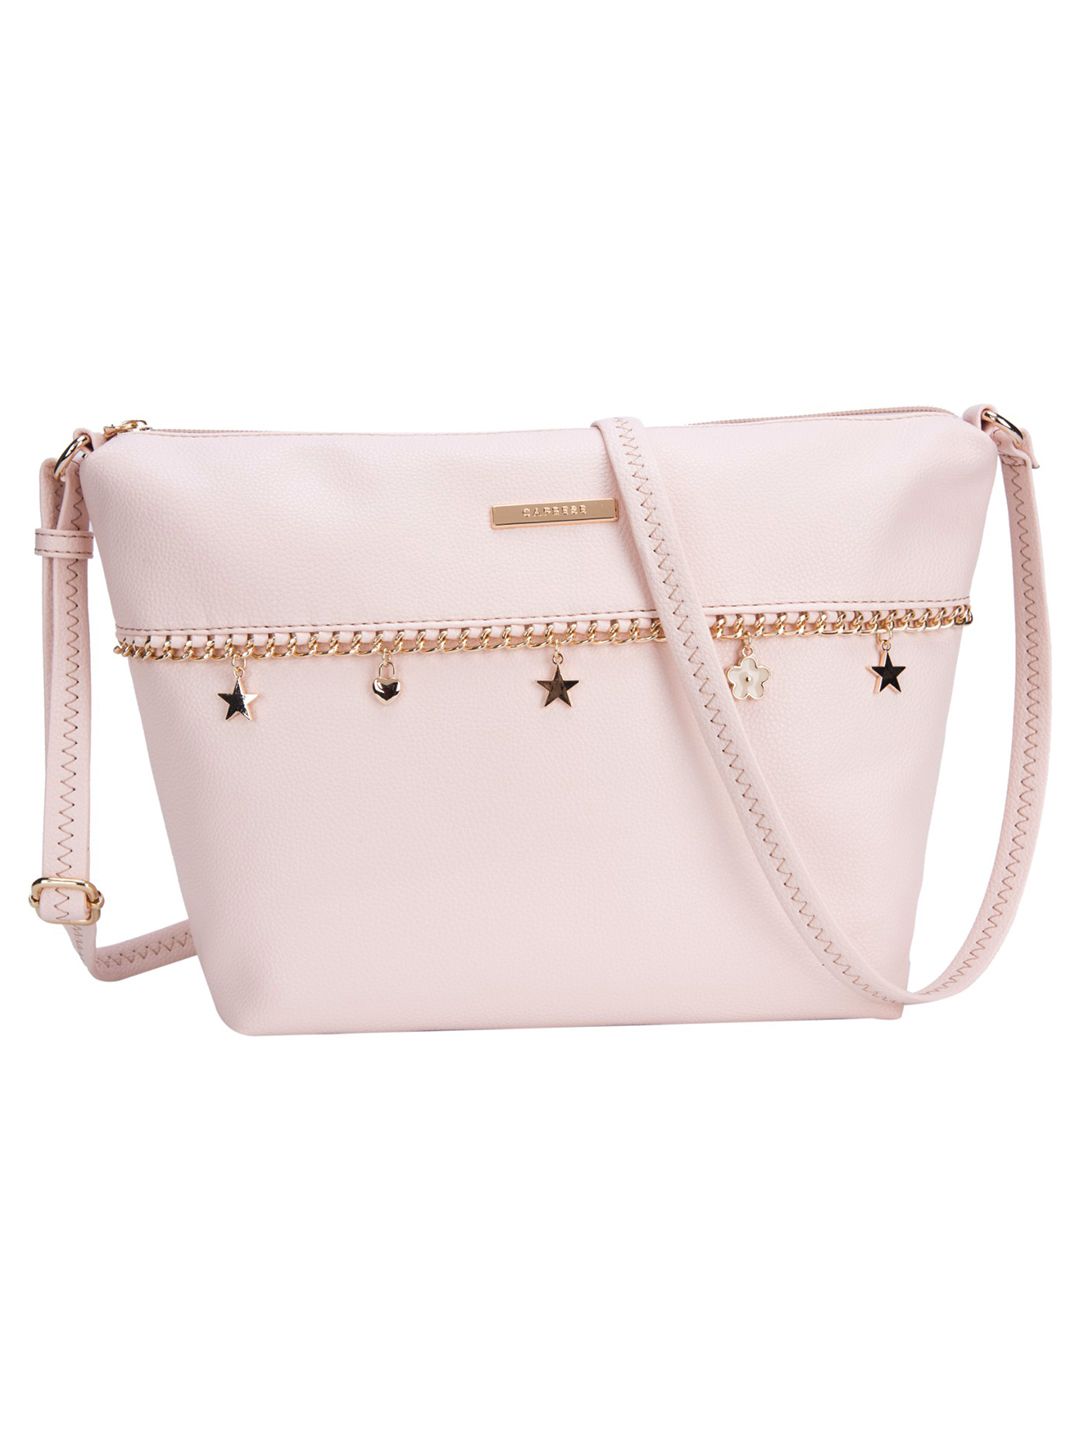 Caprese Women Pink Solid Leather Sling Bag with Embellished Detail Price in India